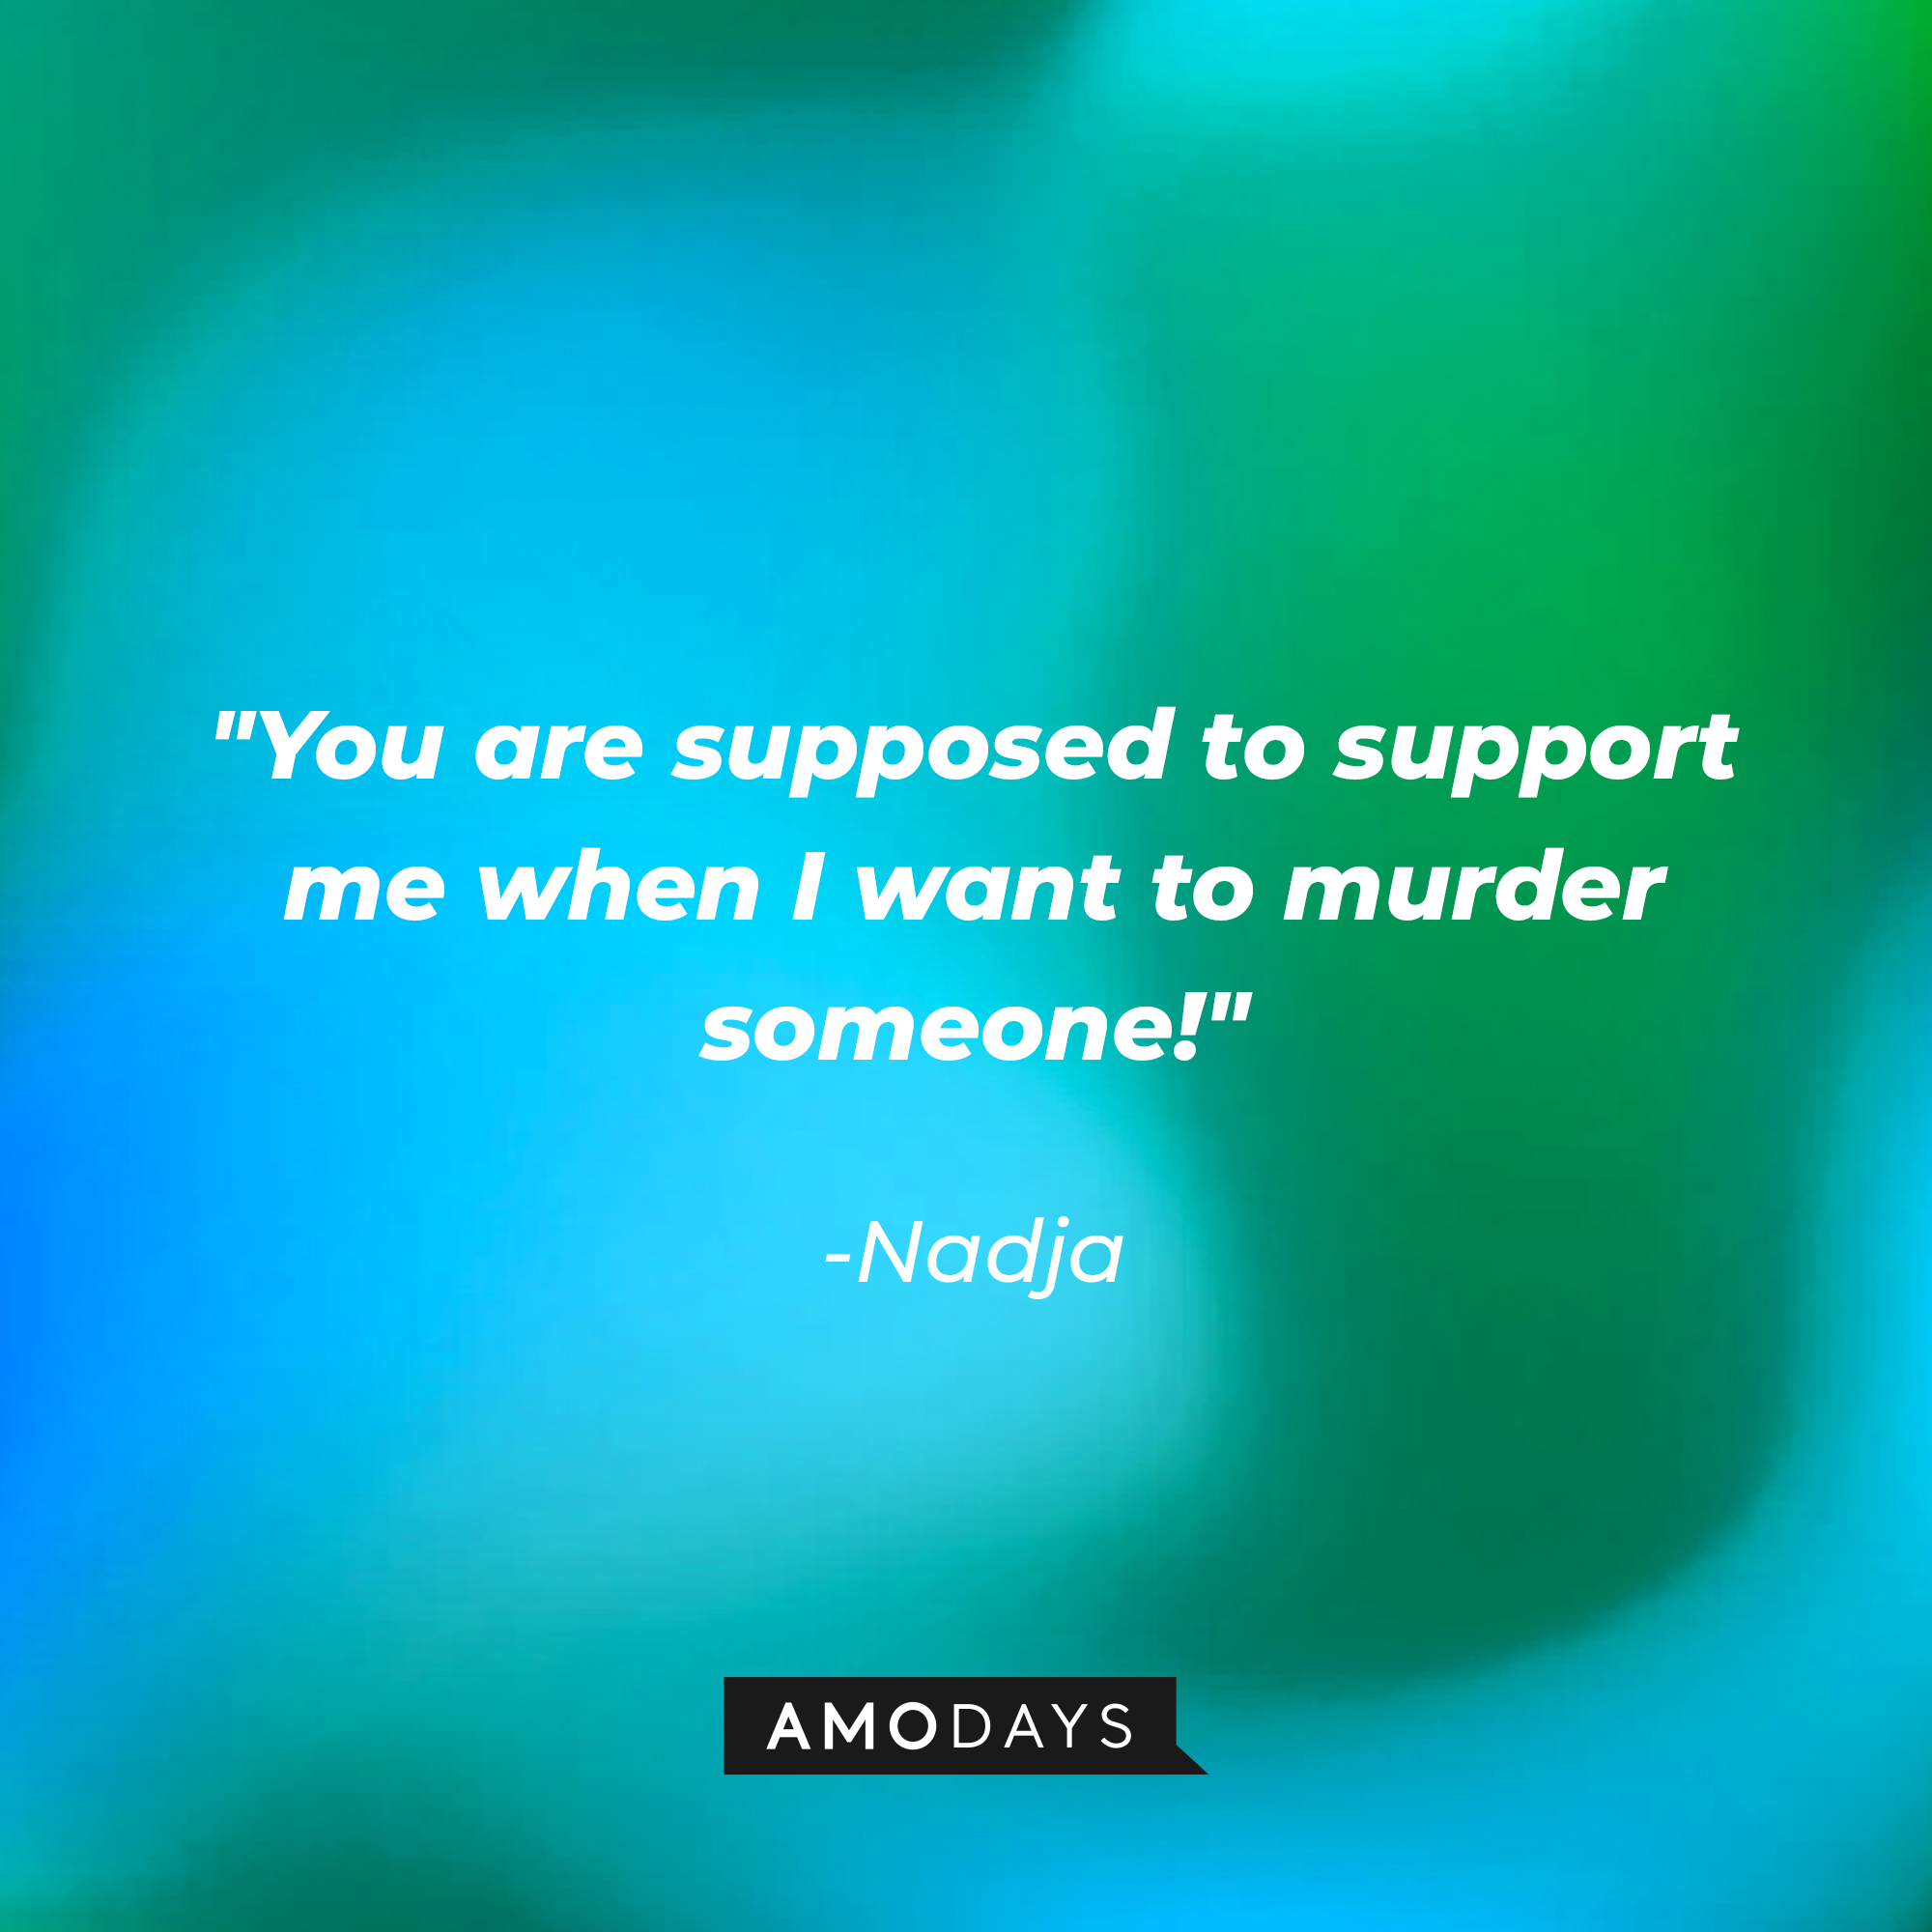 Nadja’s quote: "You are supposed to support me when I want to murder someone!" | Source: Amodays